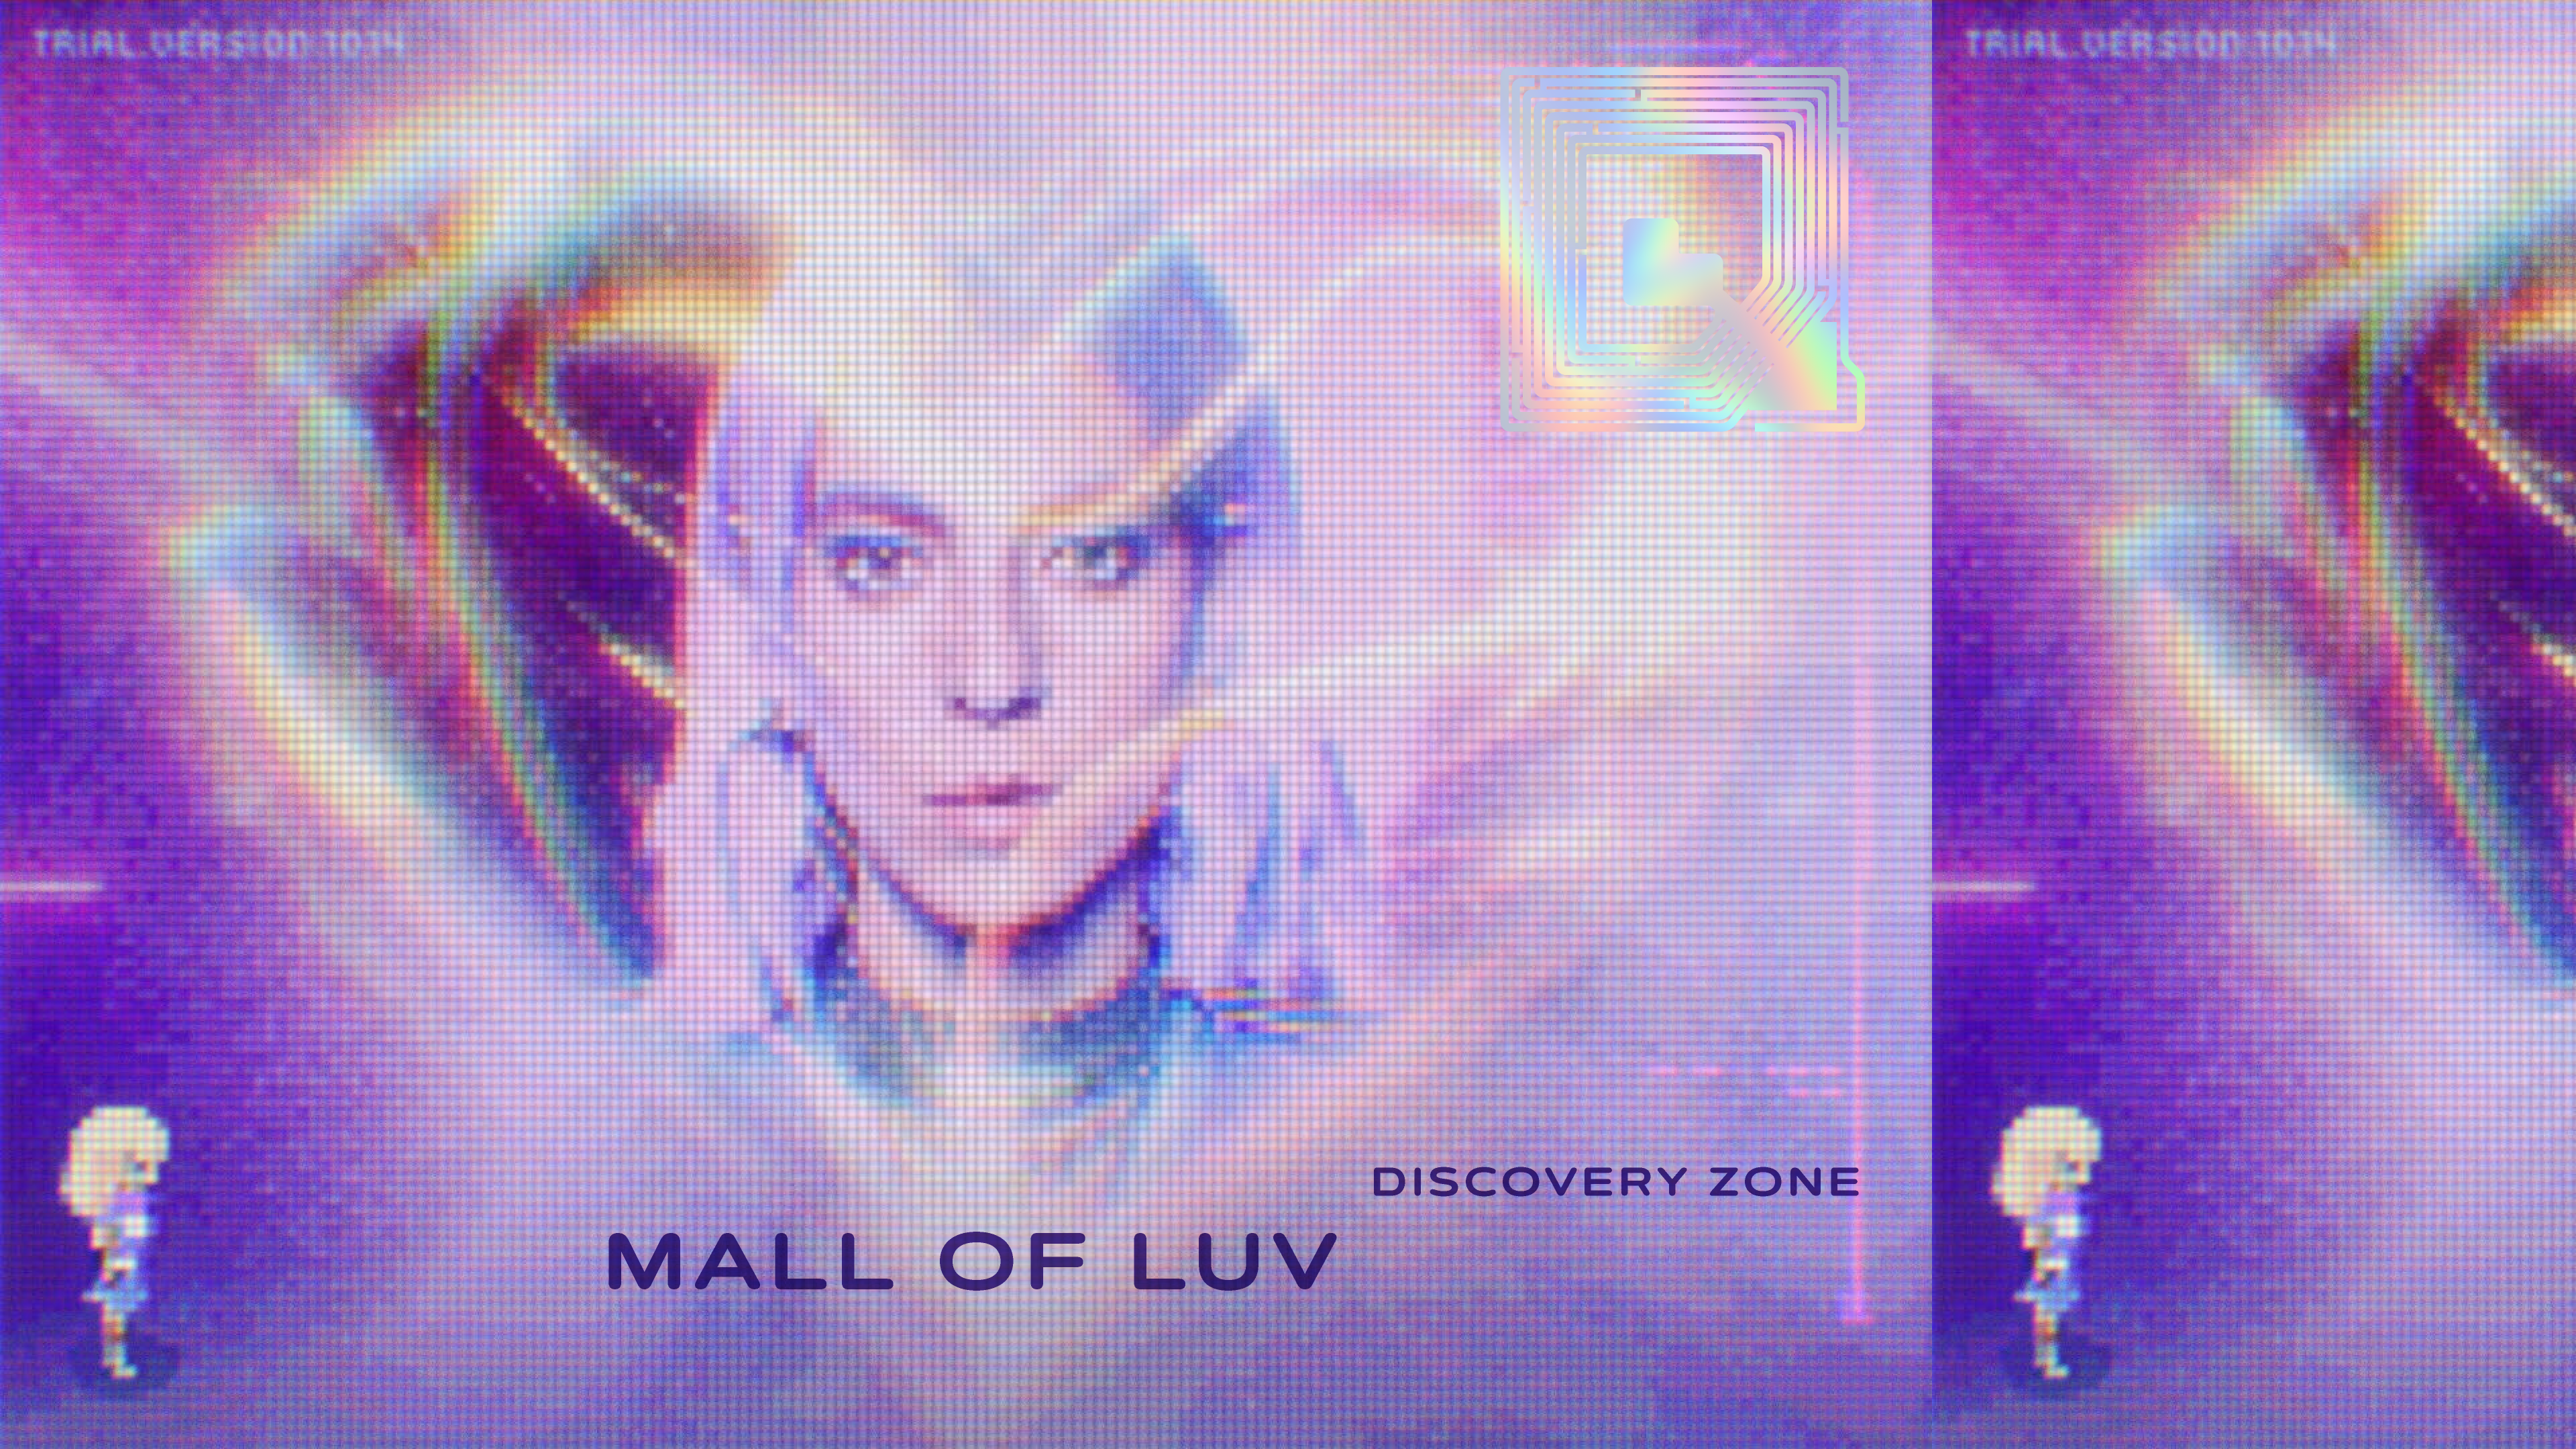 Link to Video for Discovery Zone – Mall of Luv